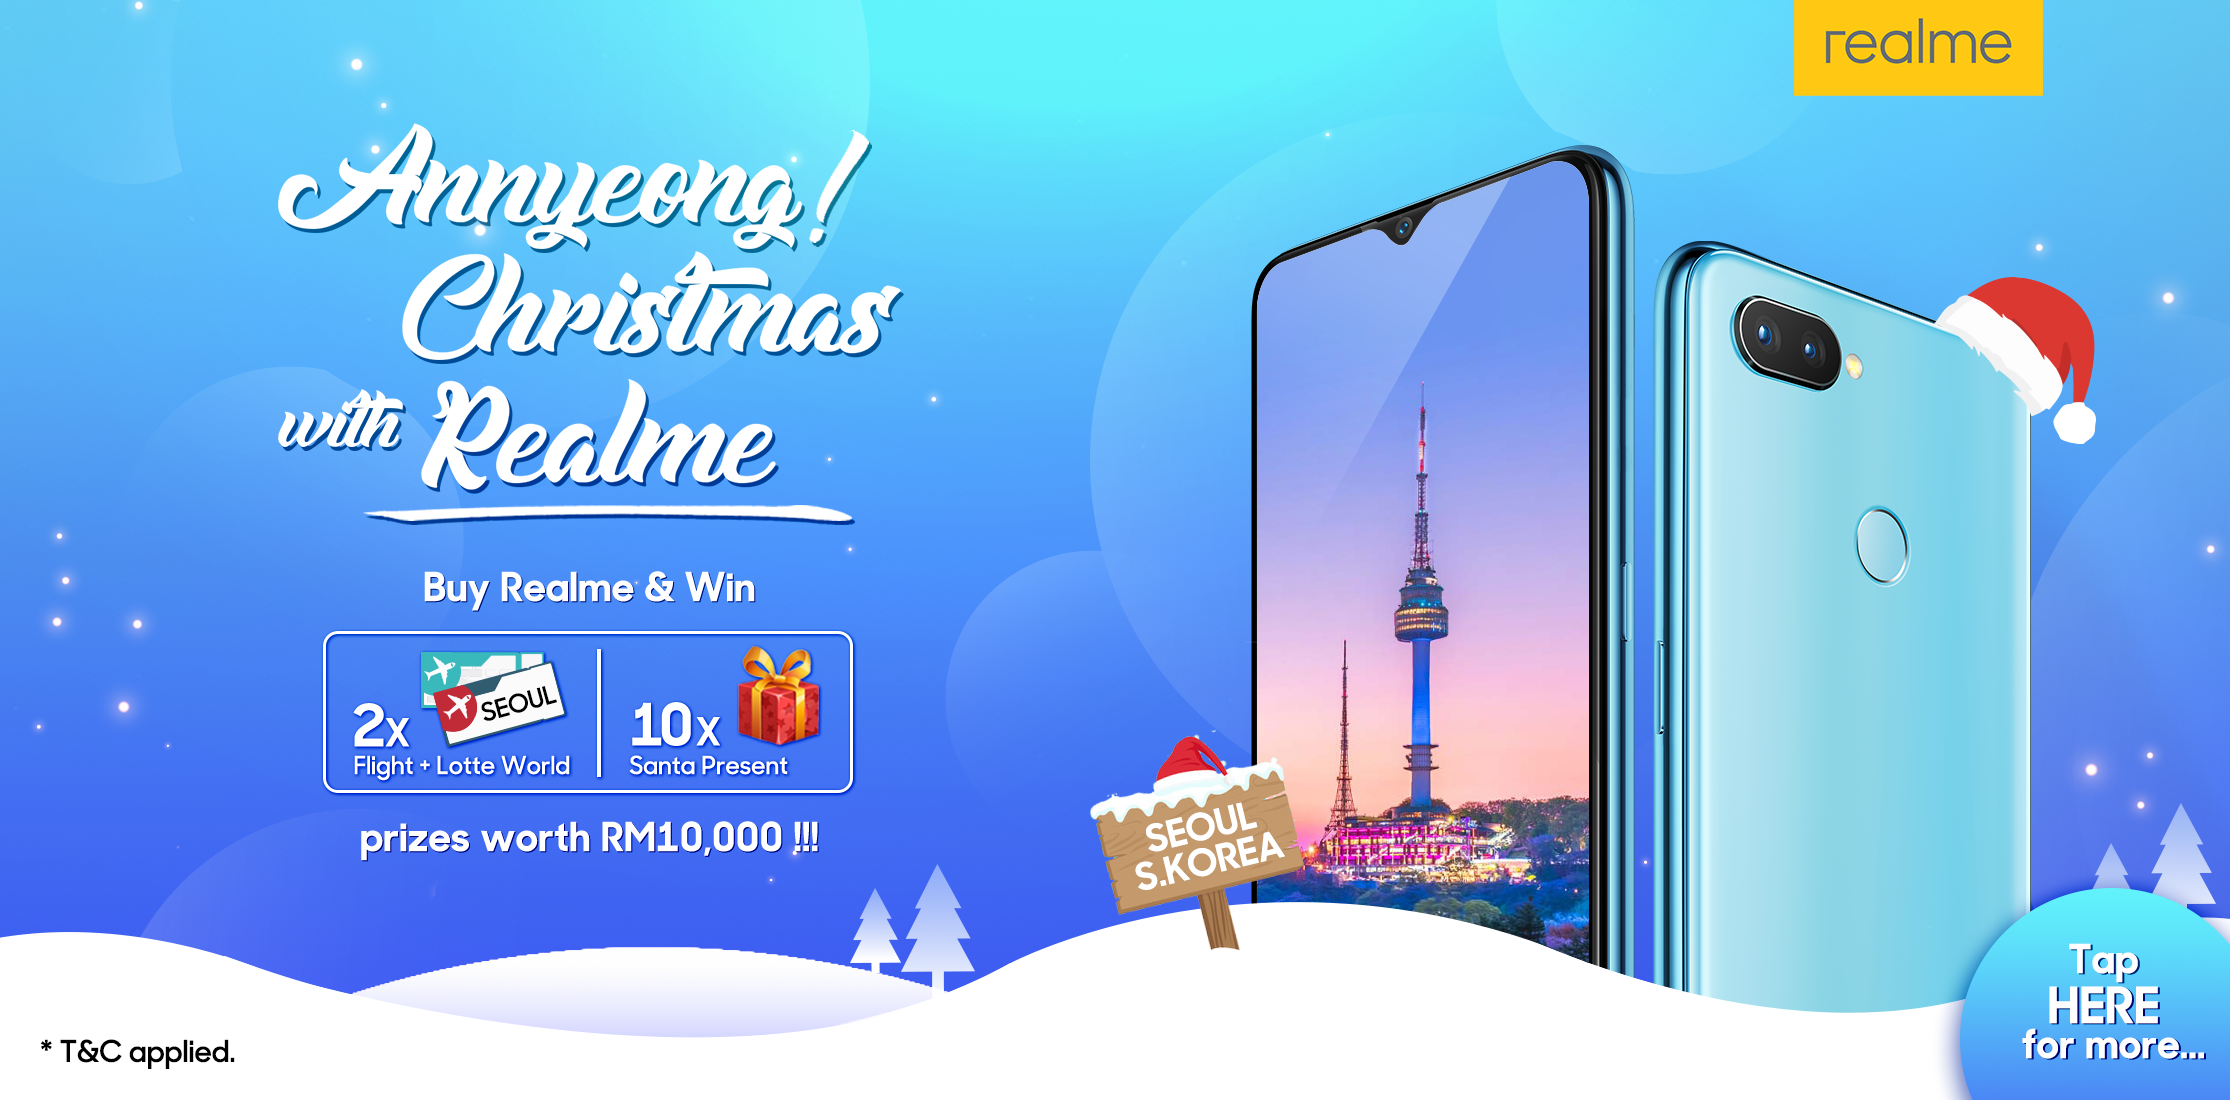 Stand a chance to win 2 flight tickets to Seoul when you purchase any Realme Smartphone